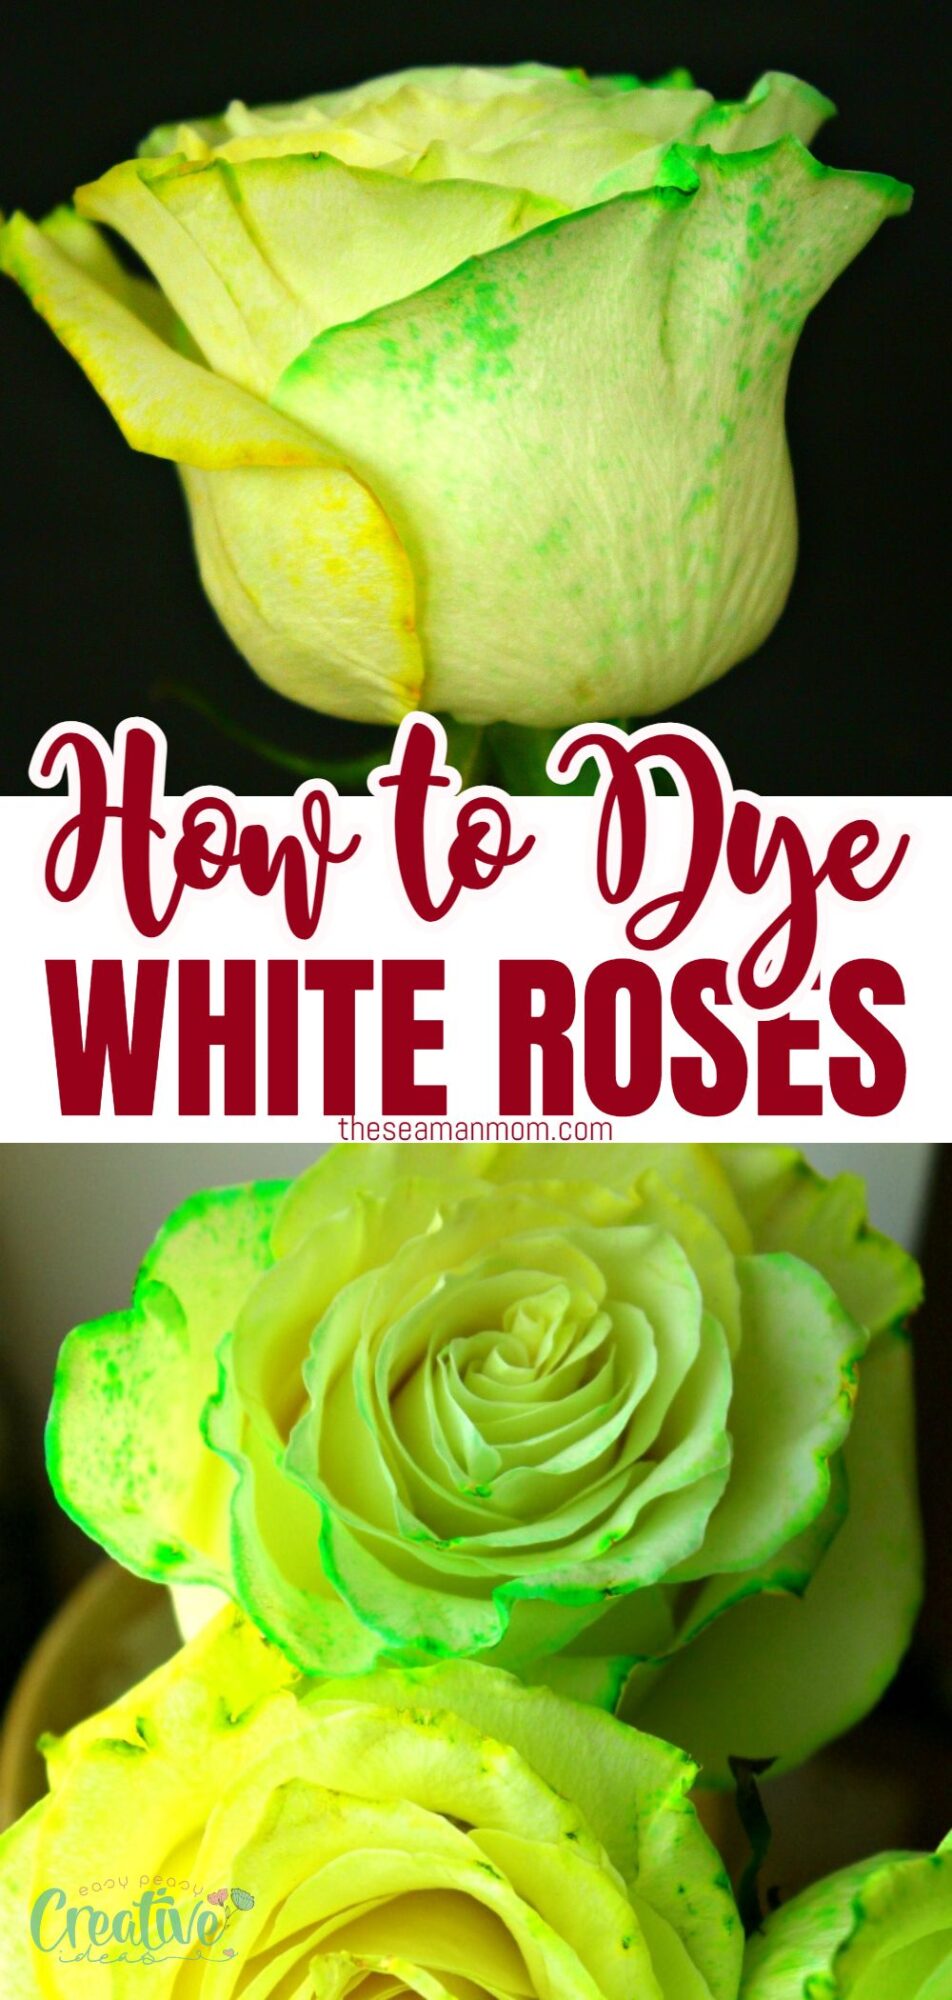 Add a splash of color to your roses with this simple tutorial on how to dye roses. Elevate their beauty and make them the perfect gift or décor!